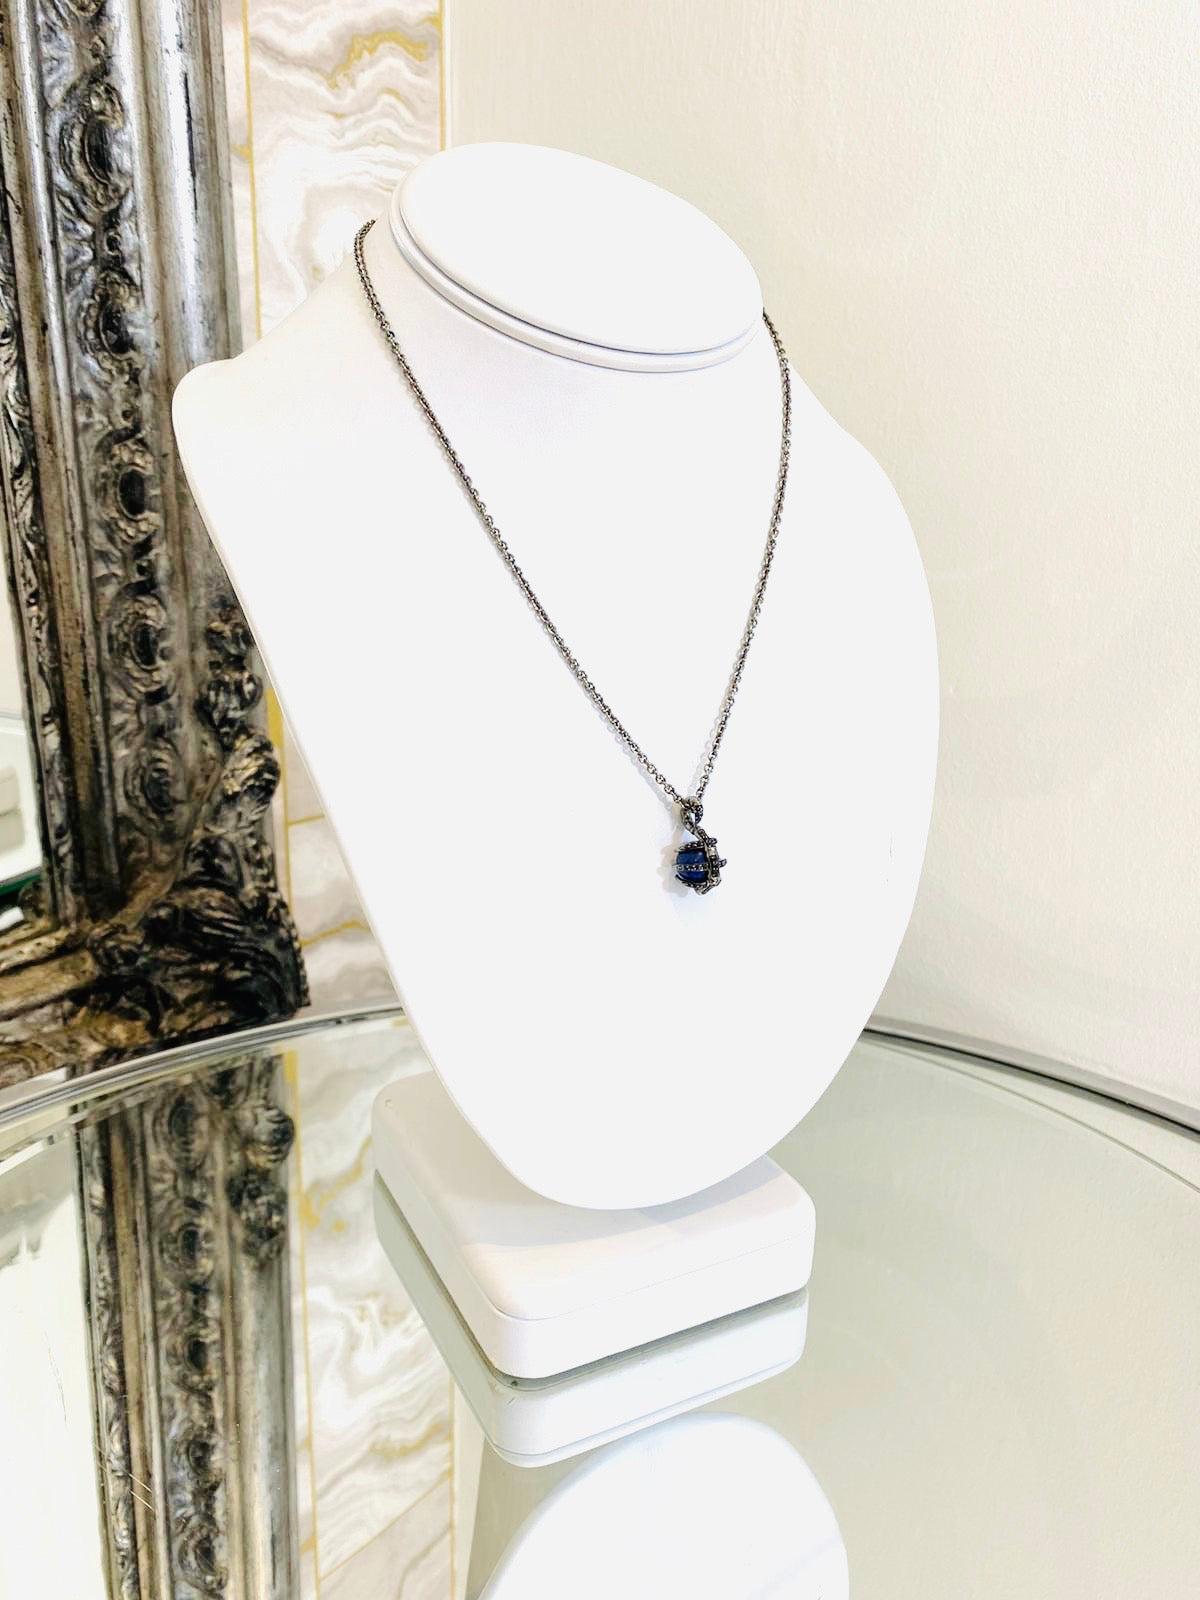 Stephen Webster 18k White Gold & Black Diamond Necklace

Stunning piece with bright blue sphere of Lapis Lazuli in a talon  pendant which is set with black diamonds.

Additional information:
Size – Chain Drop 21.5cm
Composition -  Diamonds, 18k